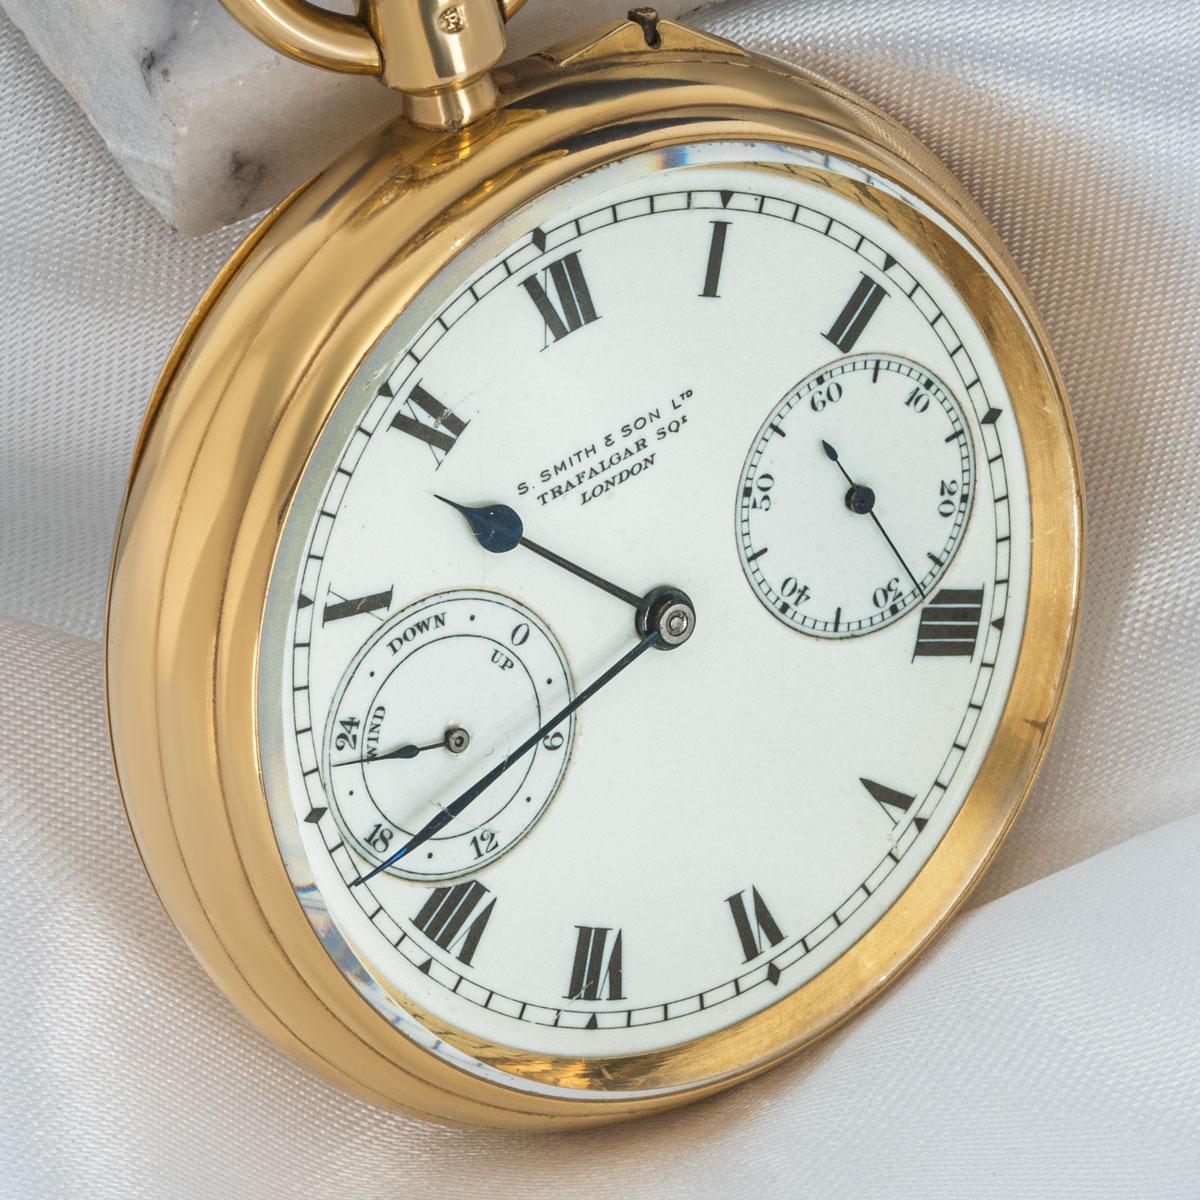 S. Smith and Son. A Rare Heavy 18ct Yellow Gold Keyless Lever Fusee Up & Down Free Sprung Open Face Pocket Watch C1919.

Dial: The beautiful cream coloured Willis dial signed S. Smith & Son Ltd Trafalgar Square London with bold Roman numerals outer